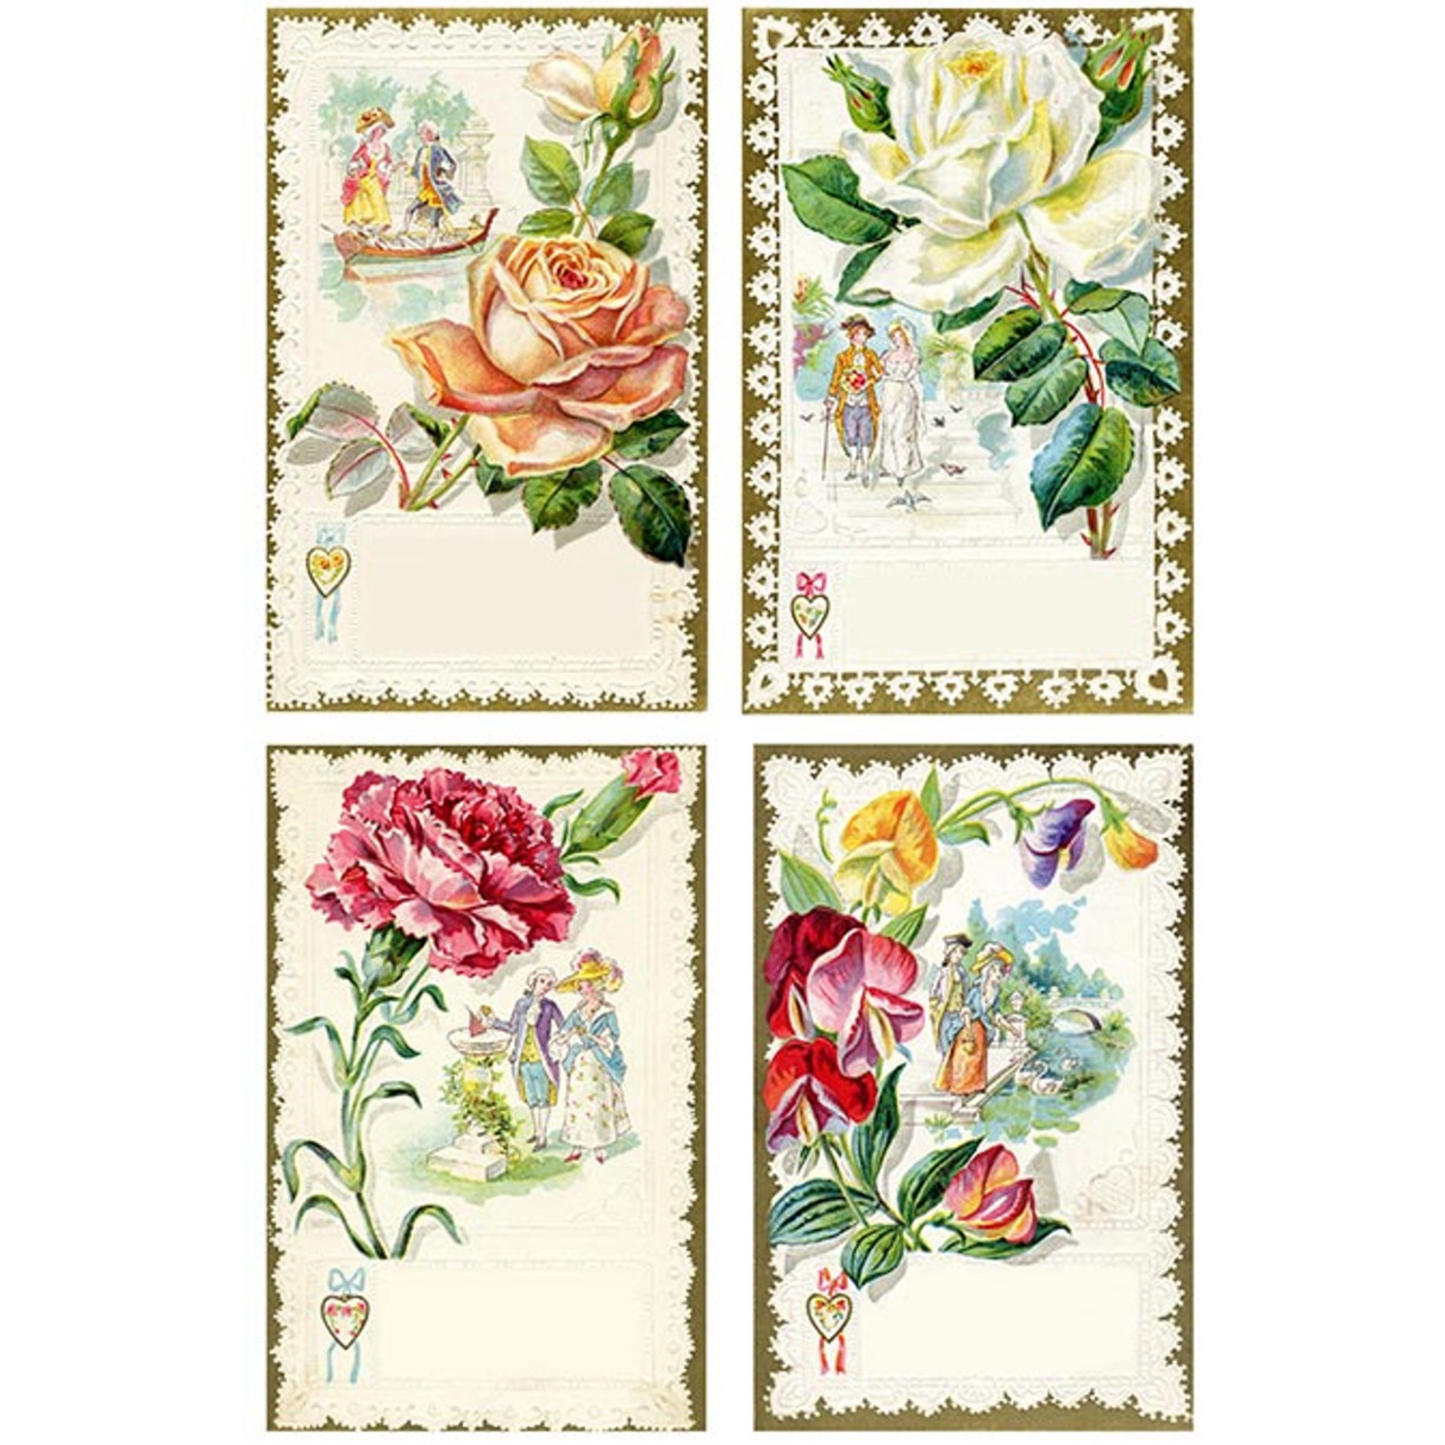 "Flowers 0276" decoupage rice paper by Paper Designs. Size A4 available at Milton's Daughter.